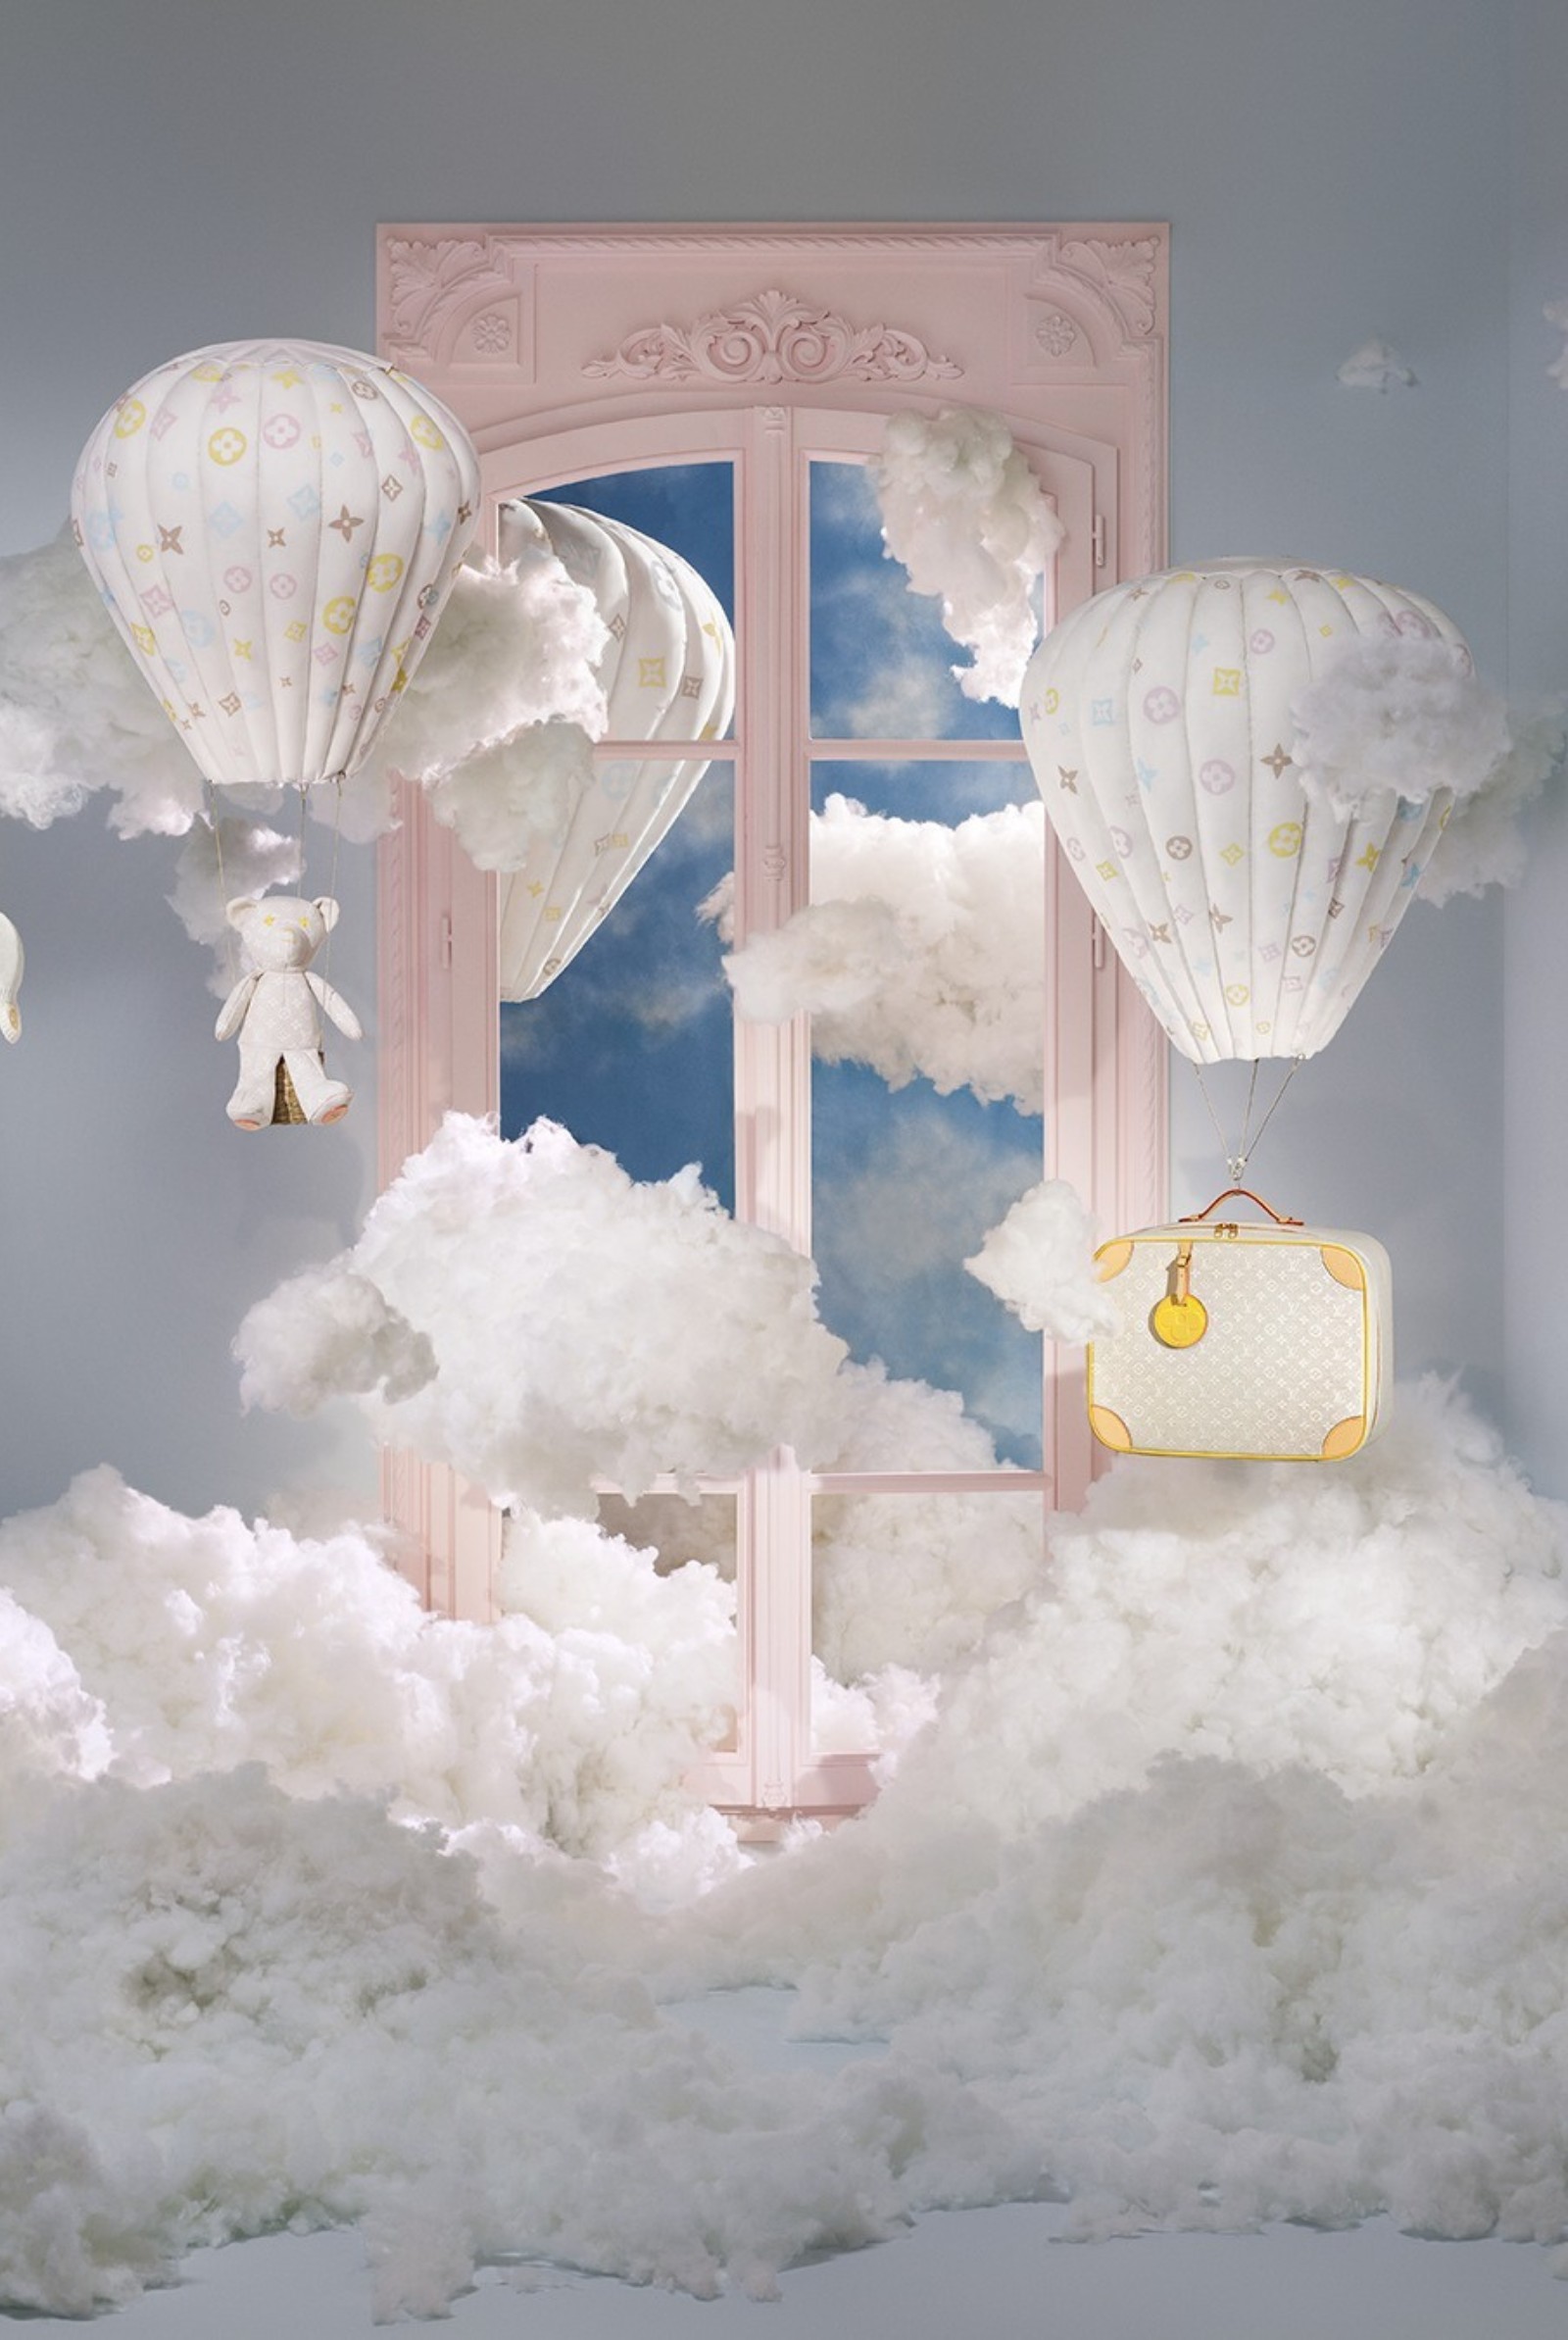 Louis Vuitton introduces its first Baby collection